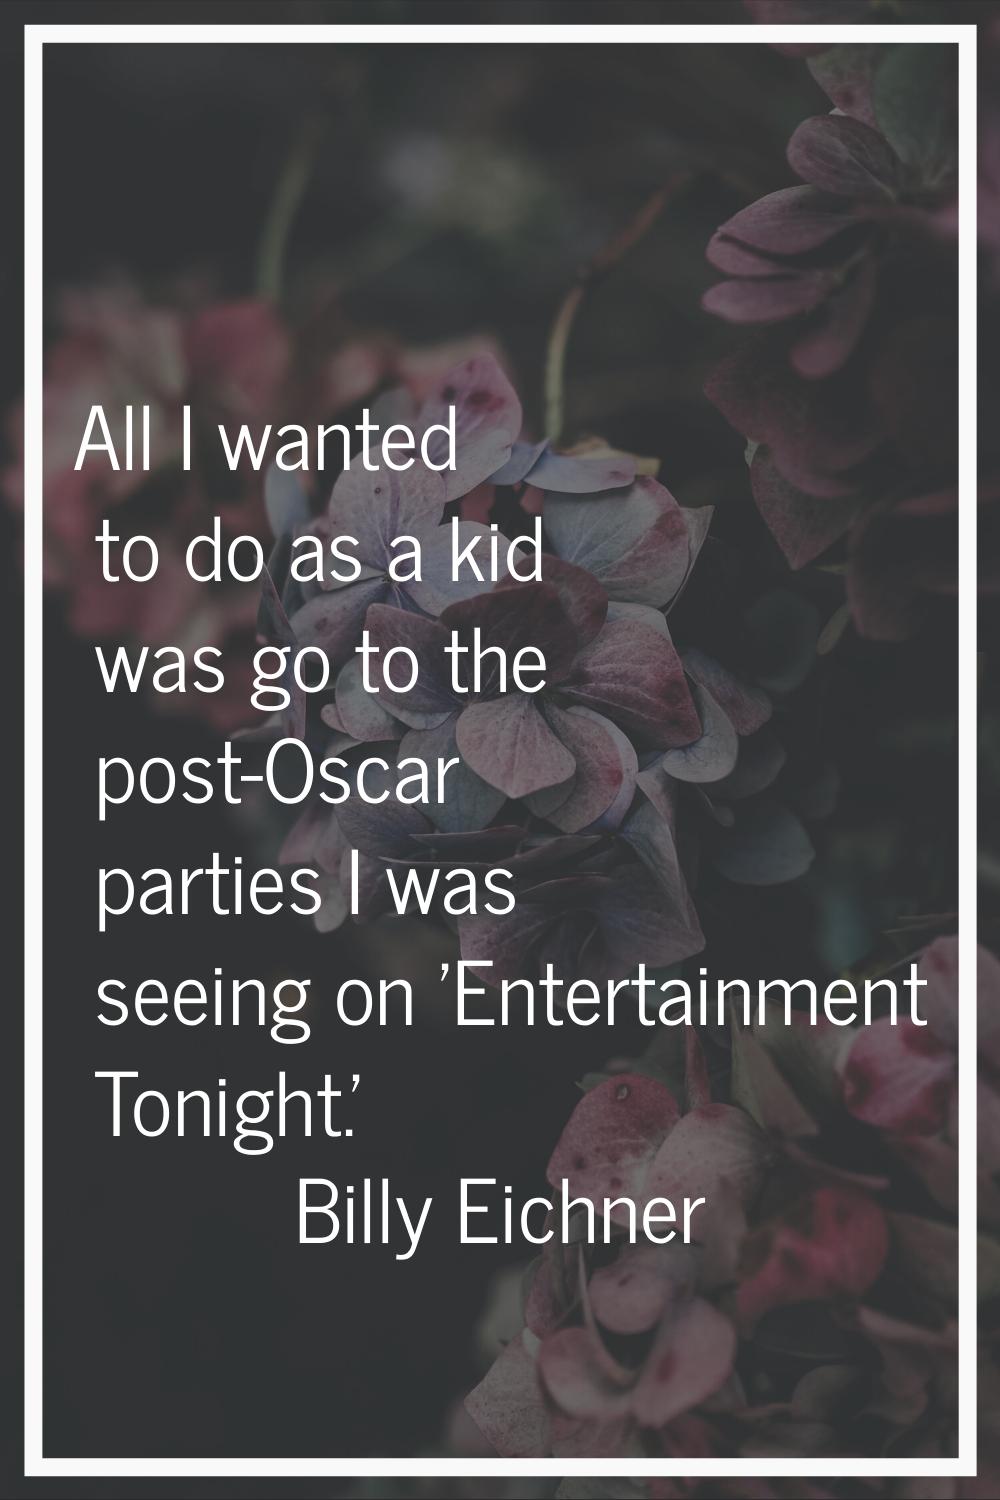 All I wanted to do as a kid was go to the post-Oscar parties I was seeing on 'Entertainment Tonight